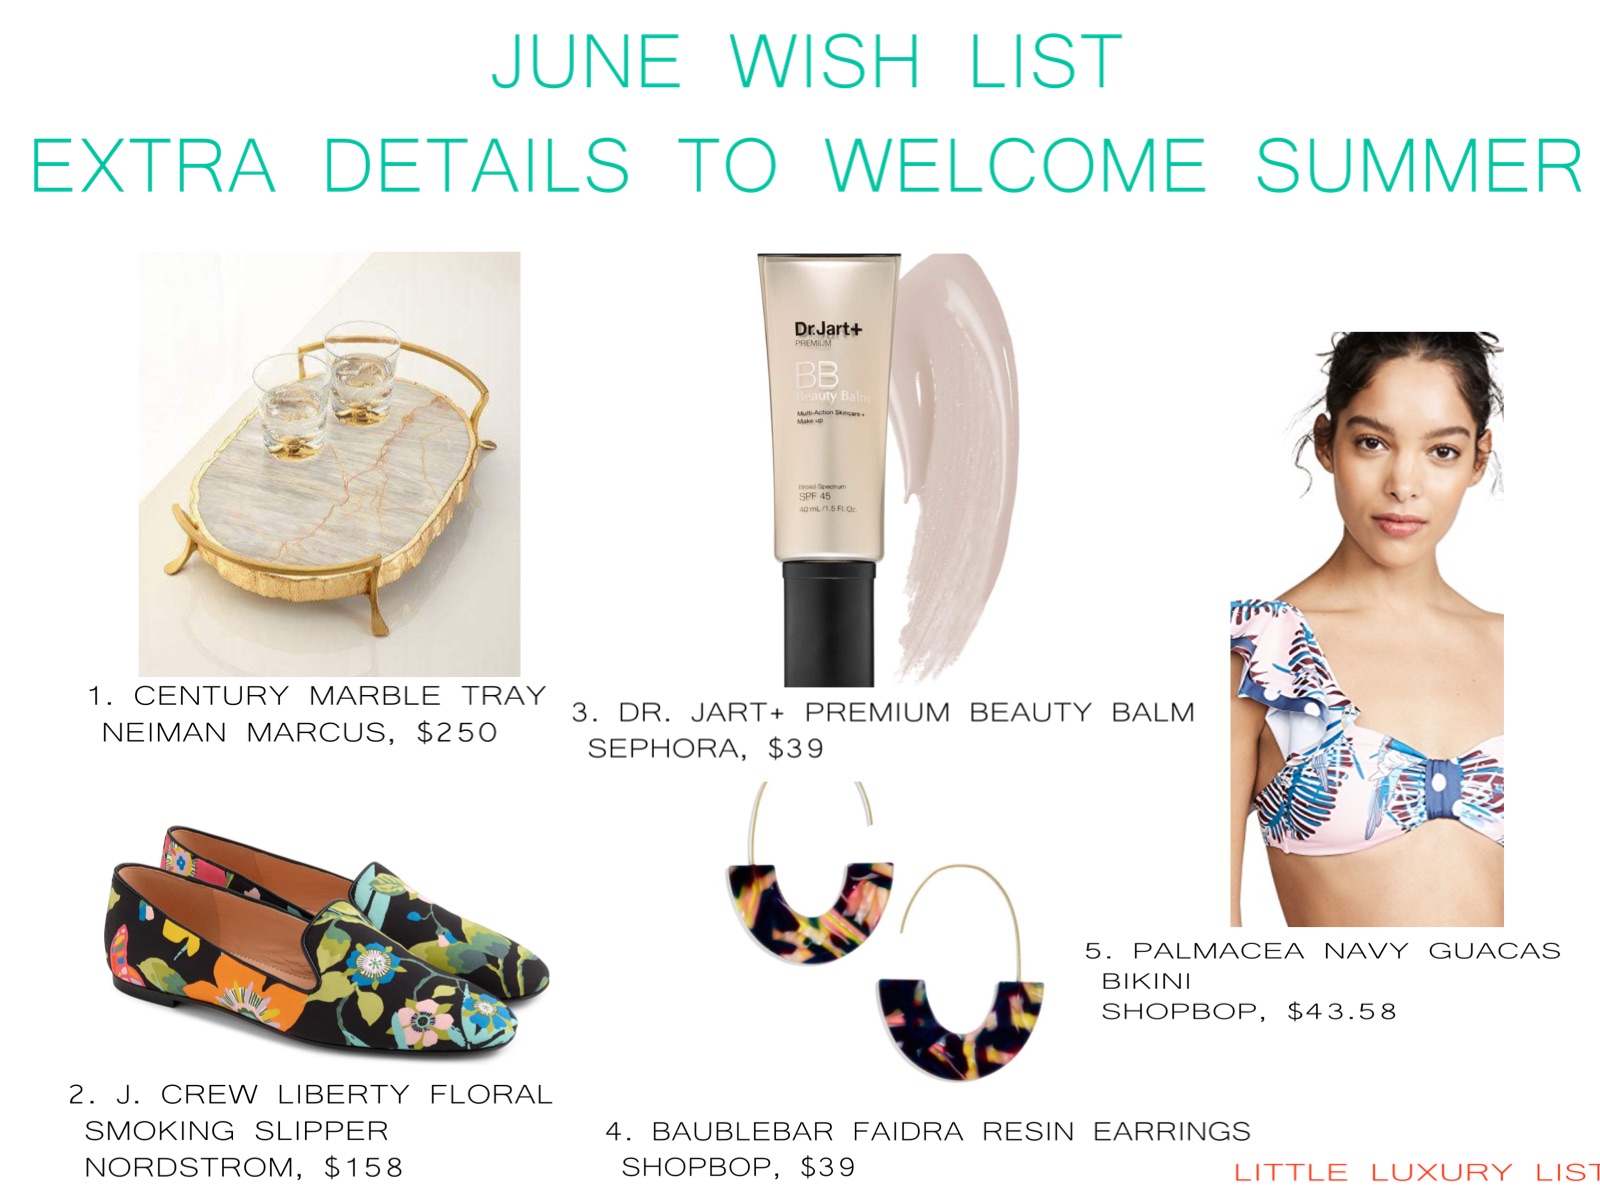 June Wish List - Extra Details to Welcome Summer